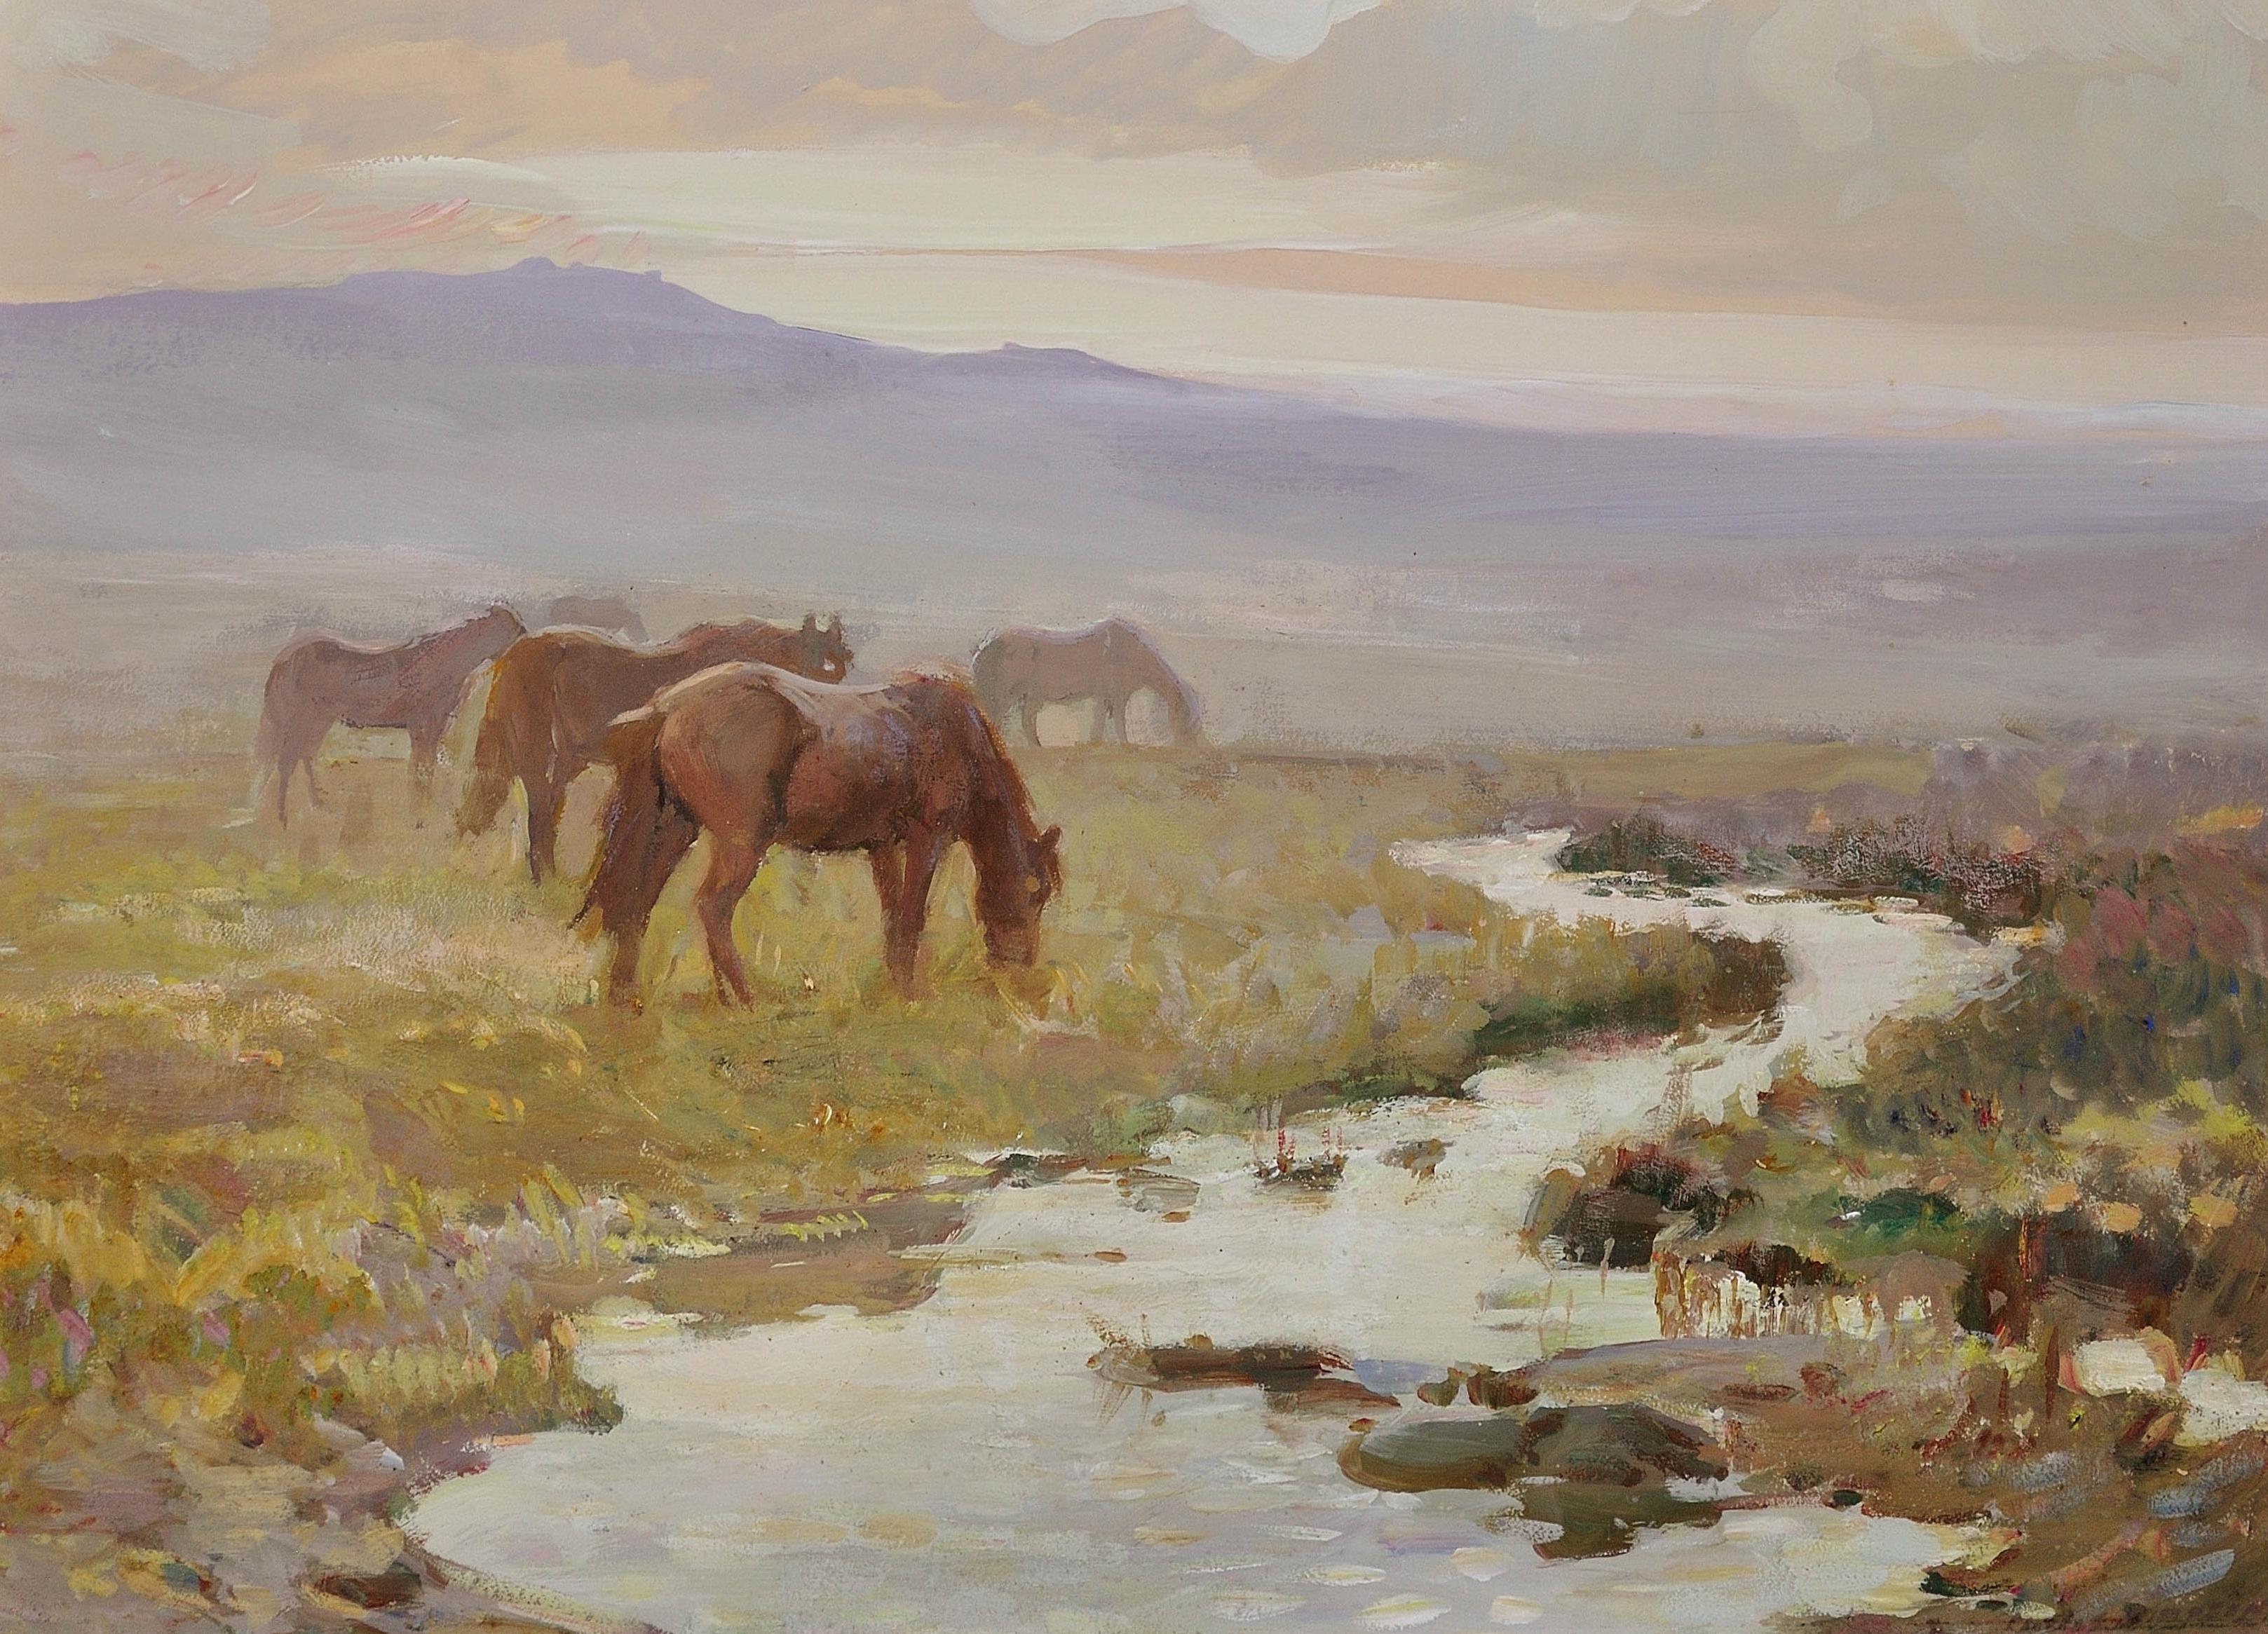 Dartmoor Ponies. Early Morning Mist and Haze. Devon Moor Pony.1930s.Wild Horses - Painting by Charles Walter Simpson